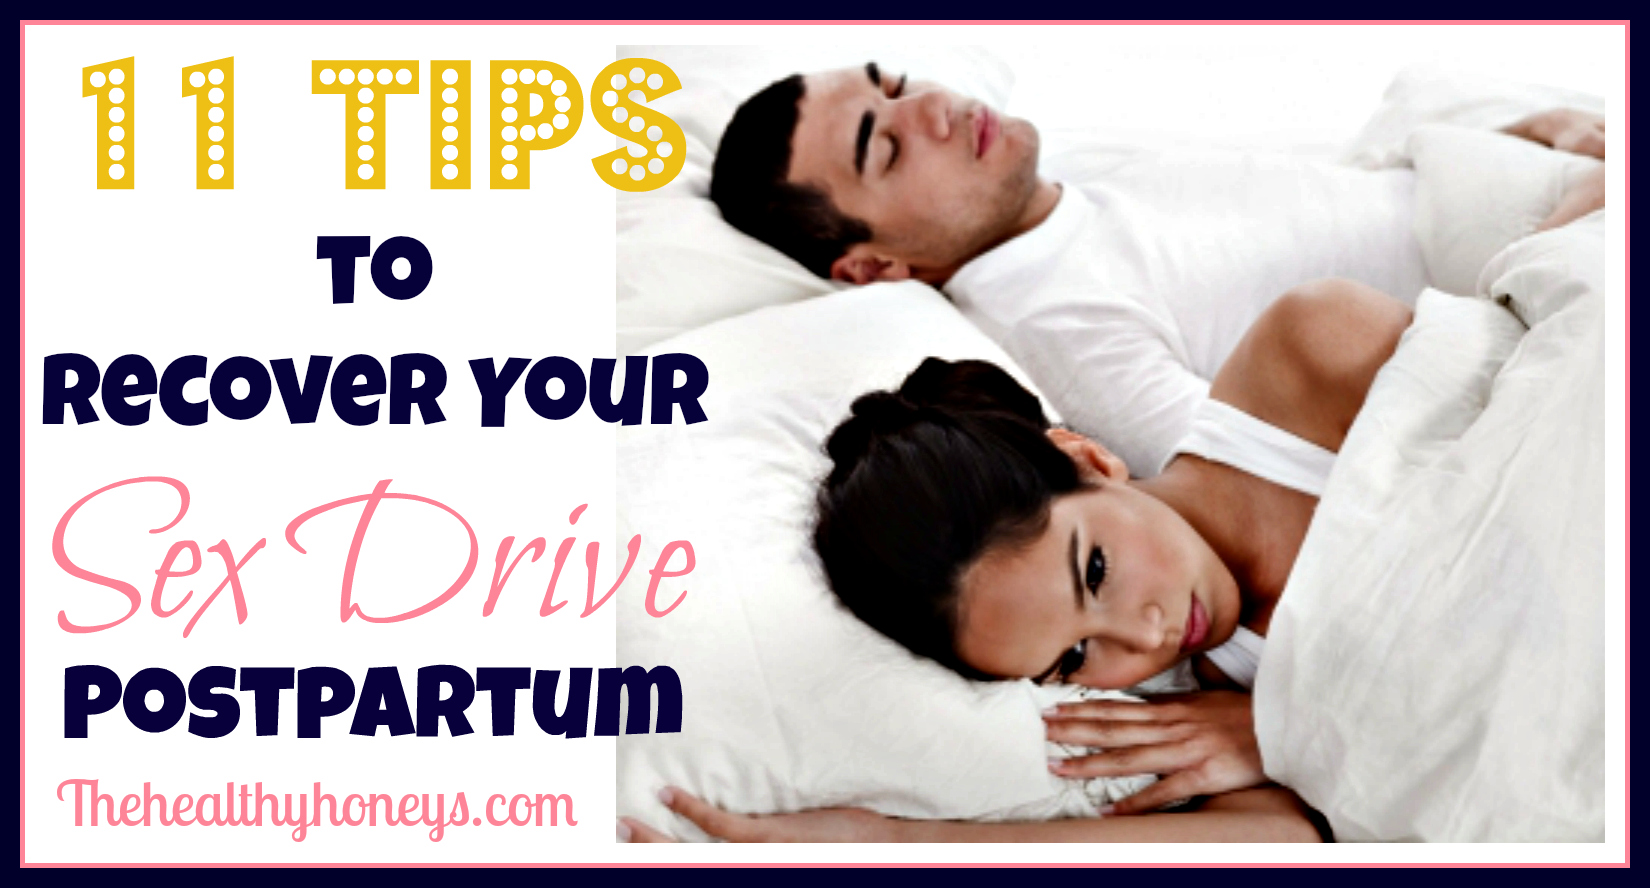 11 Tips to Recover Your Sex Drive Postpartum